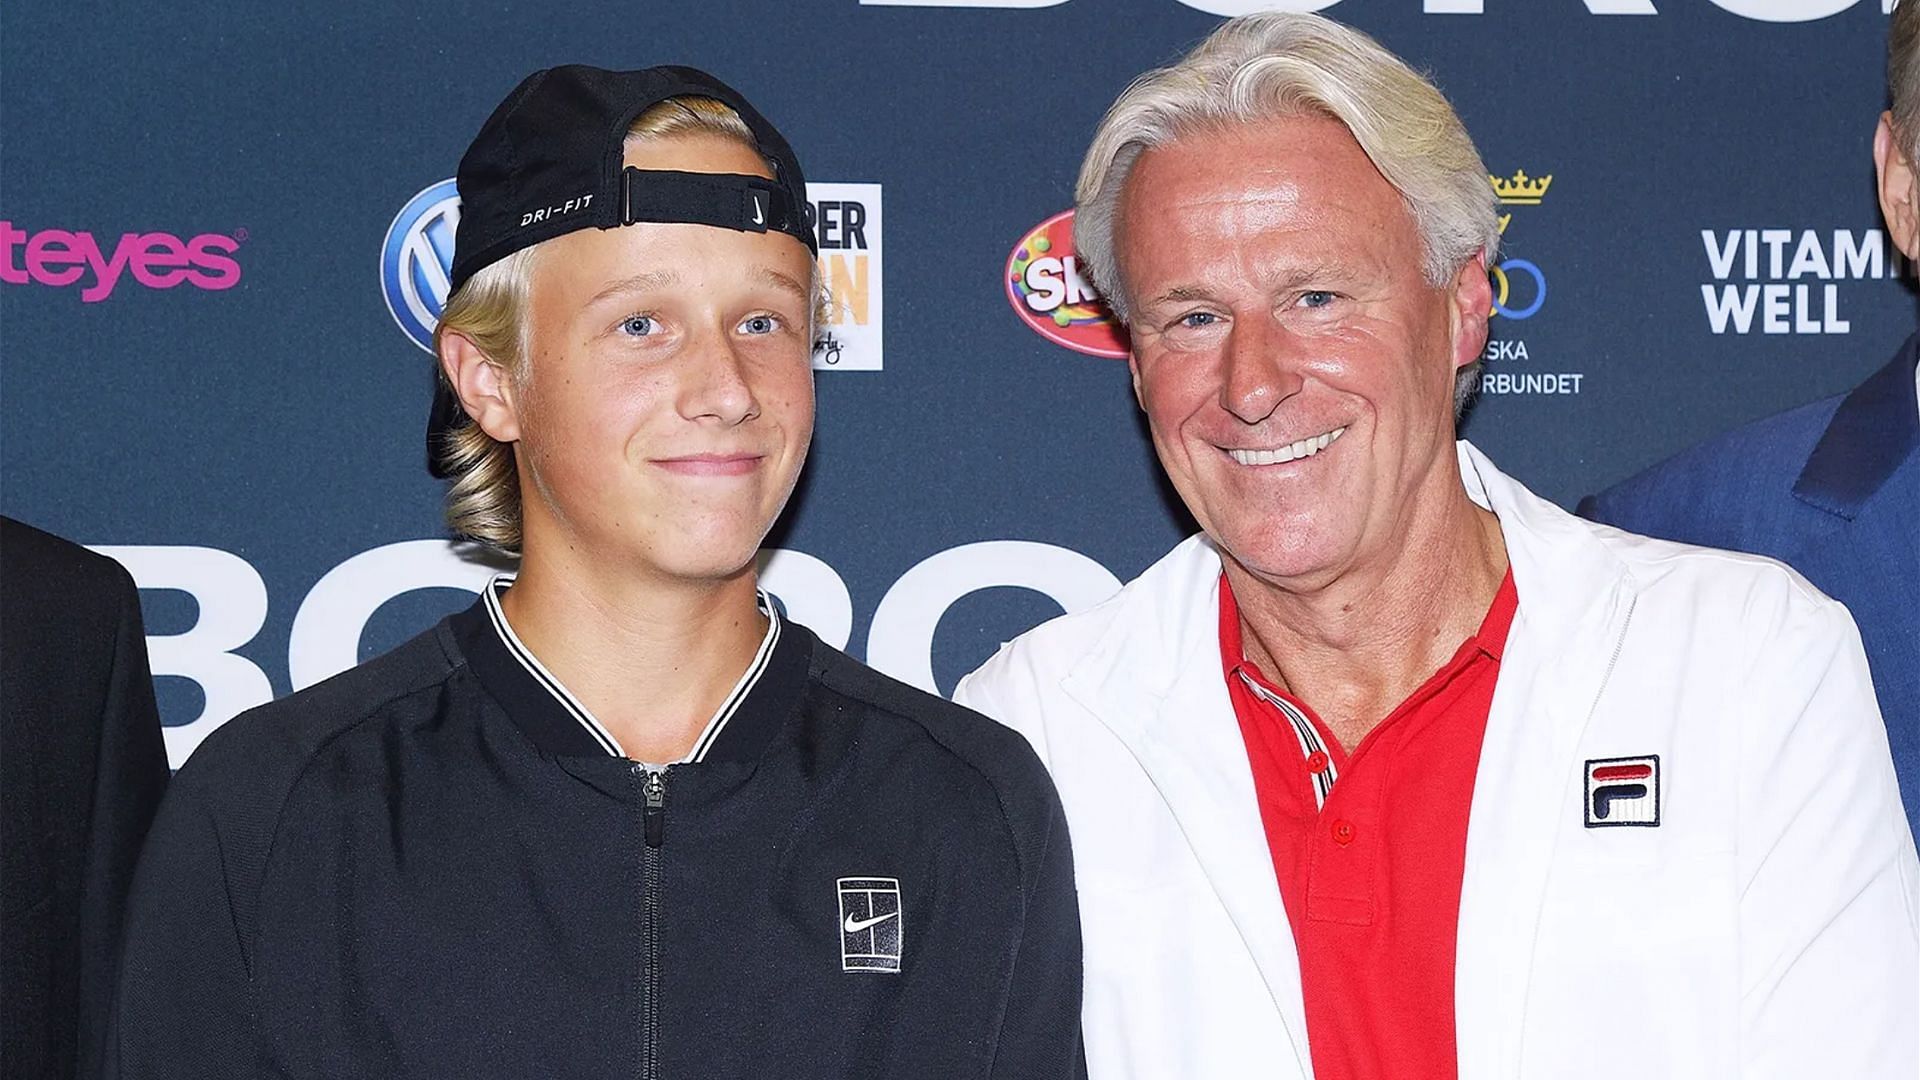 Bjorn Borg (left) is in Chennai for his son Leo